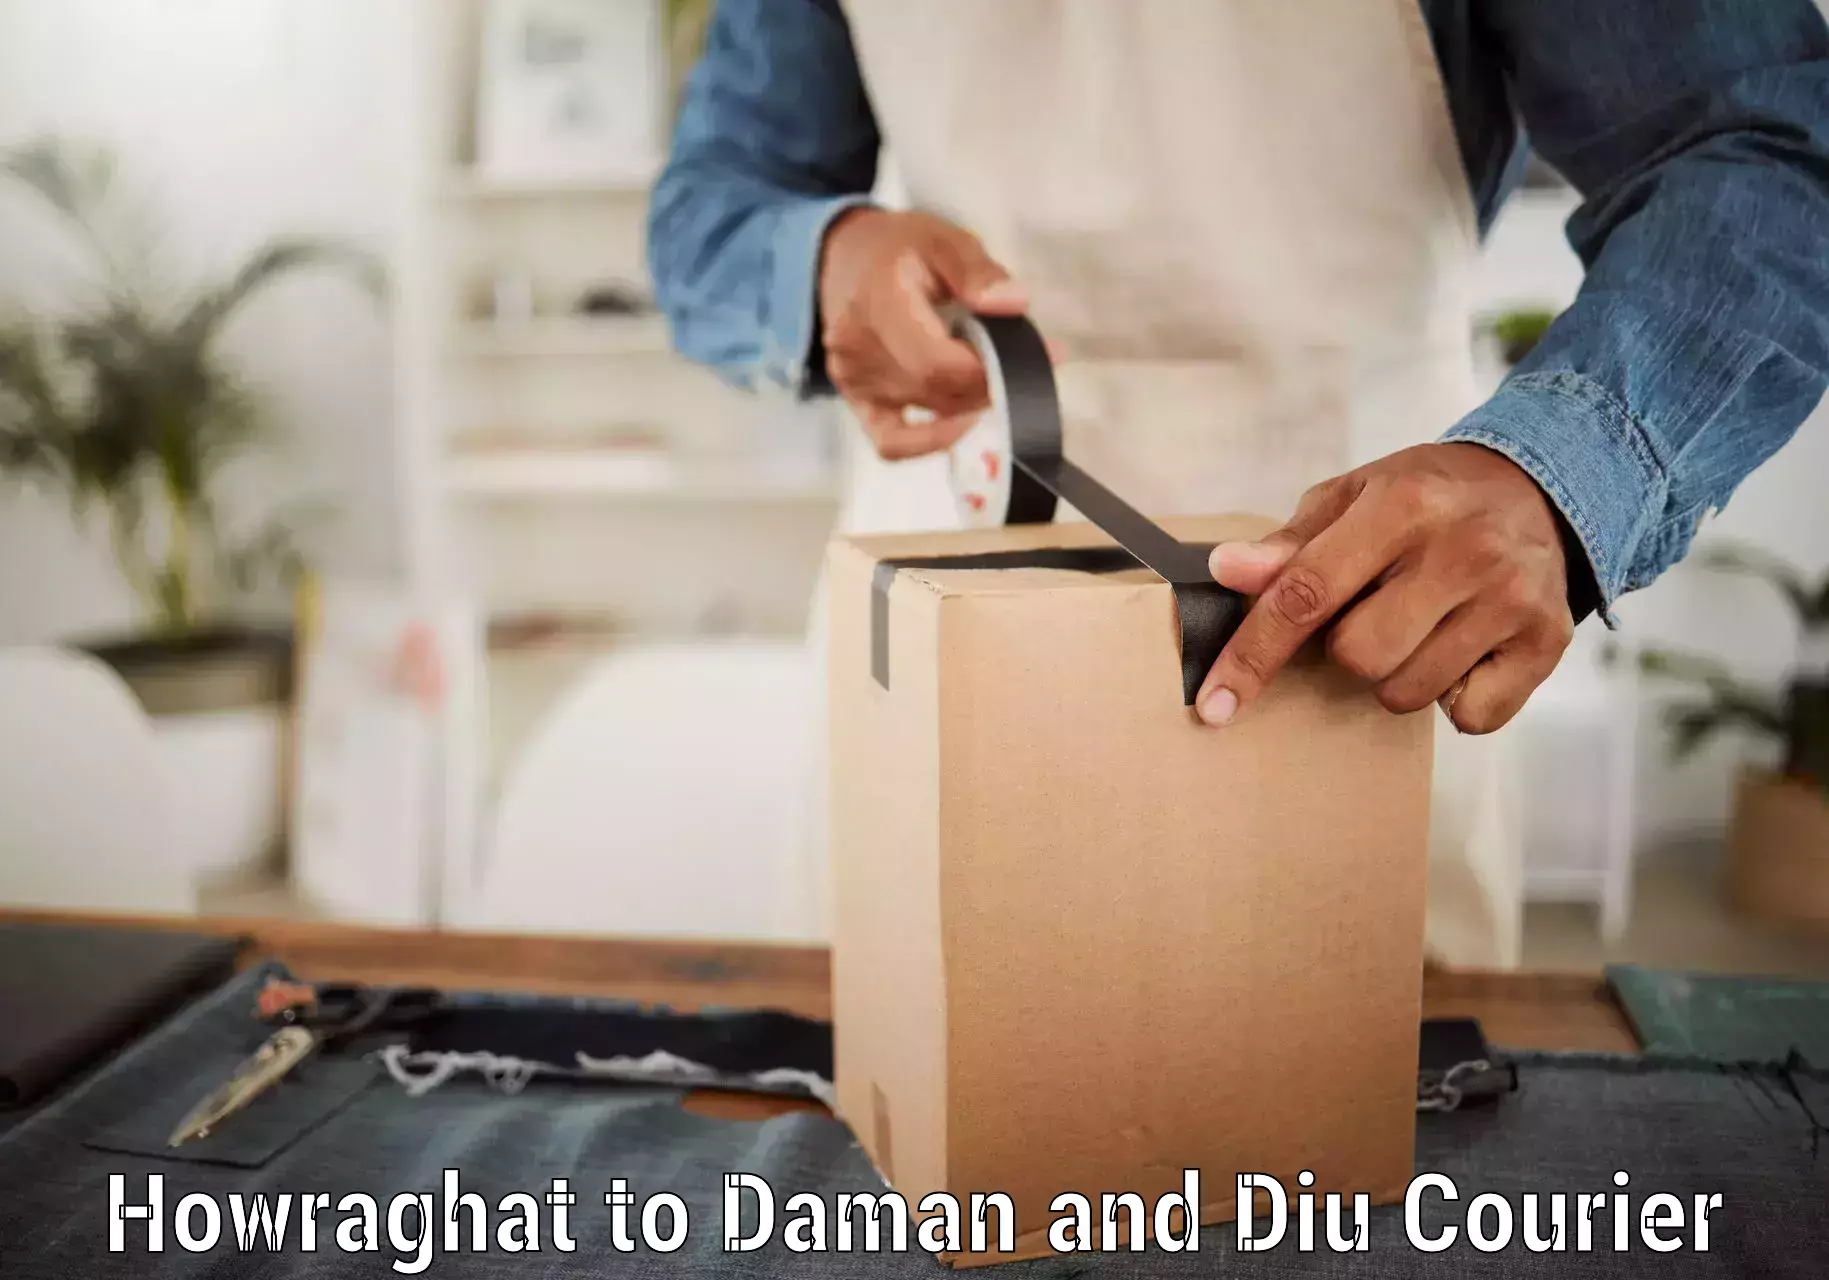 Courier service innovation Howraghat to Diu